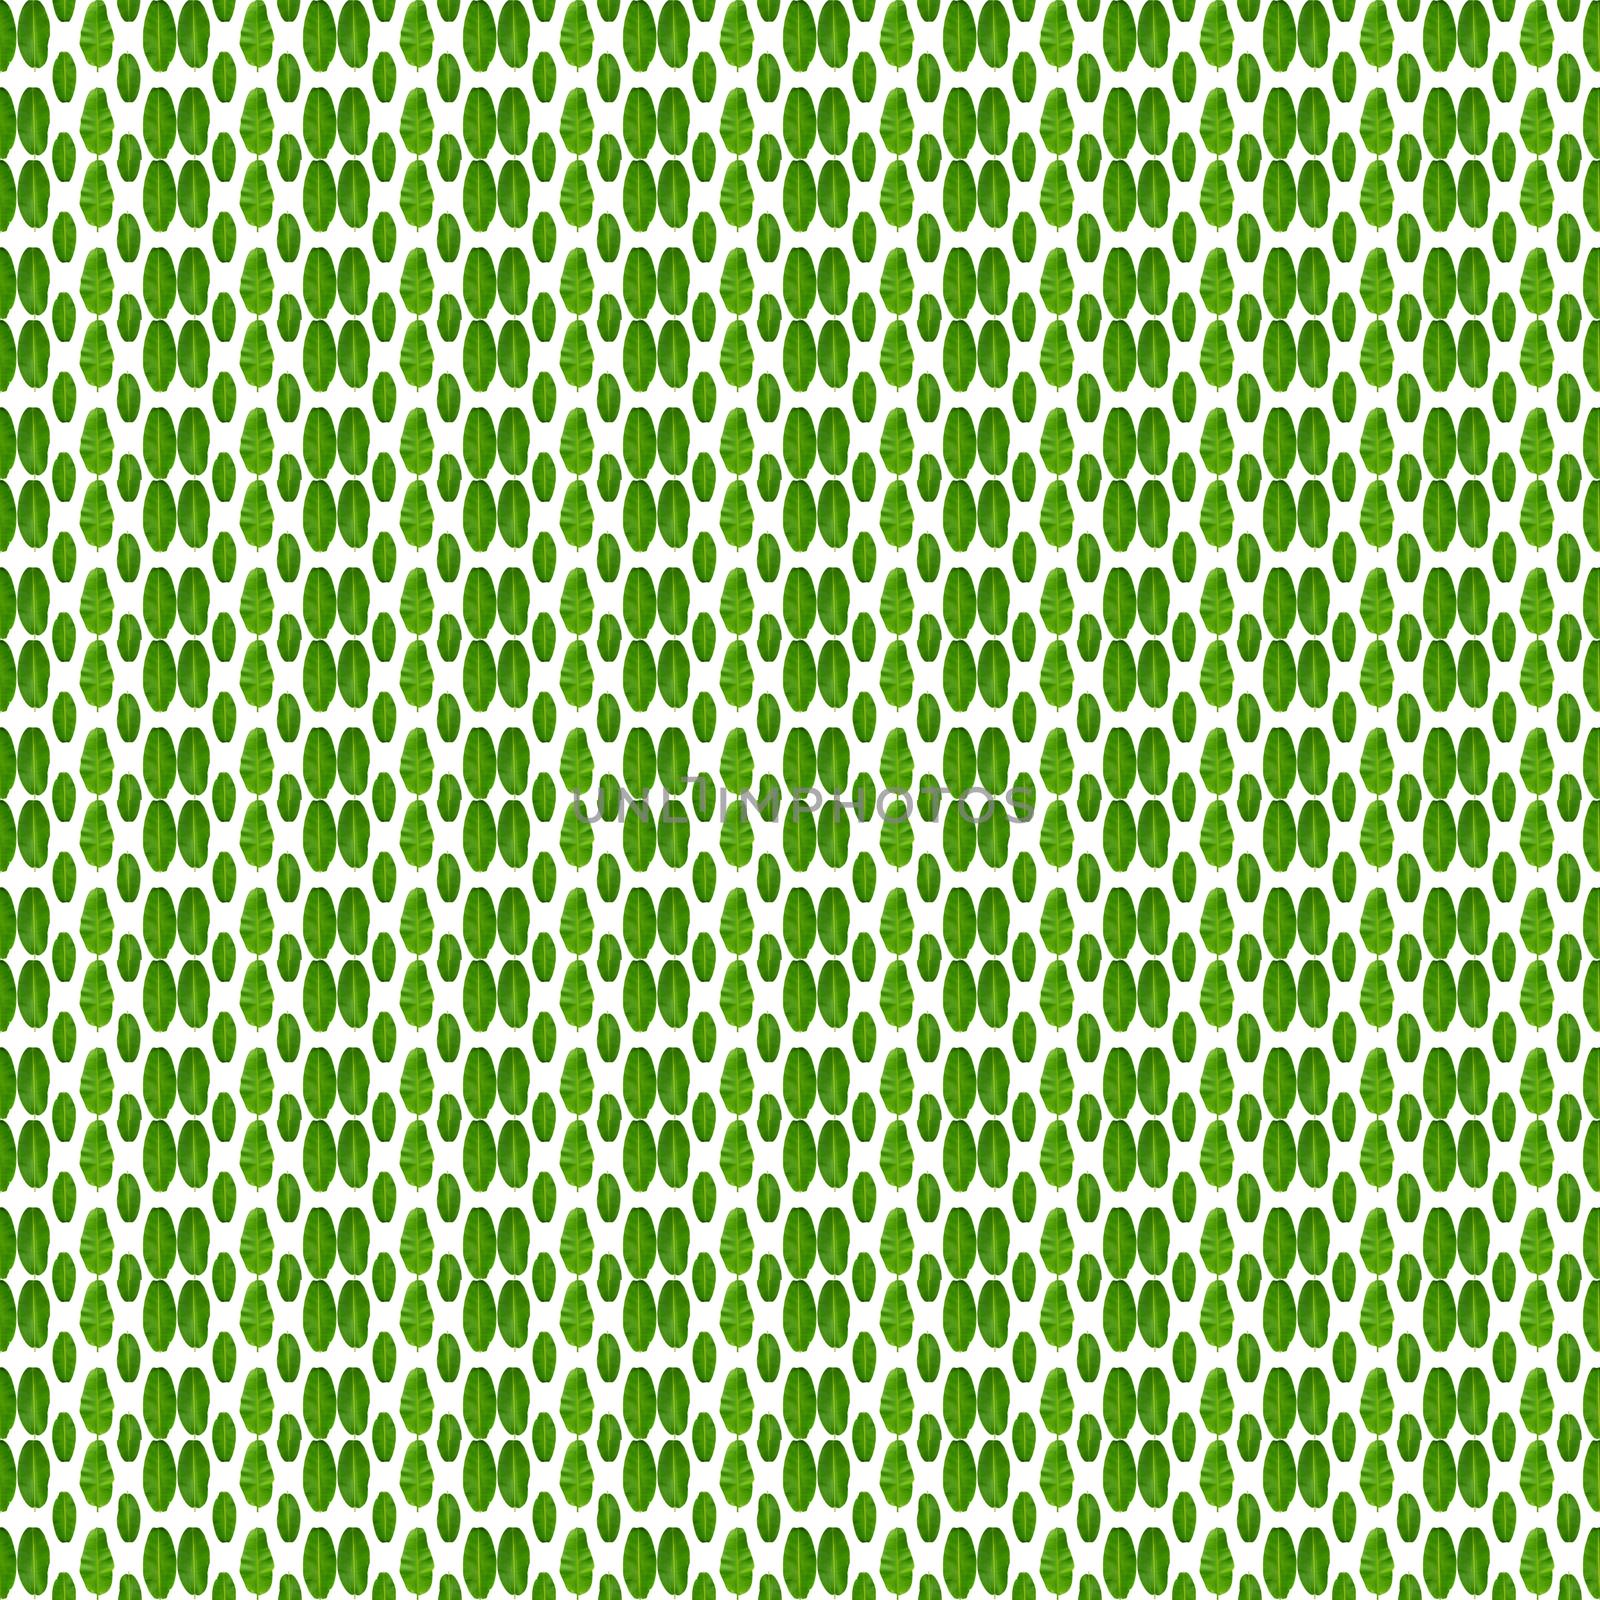 Seamless pattern of green banana leaves on white background. Pla by Unimages2527